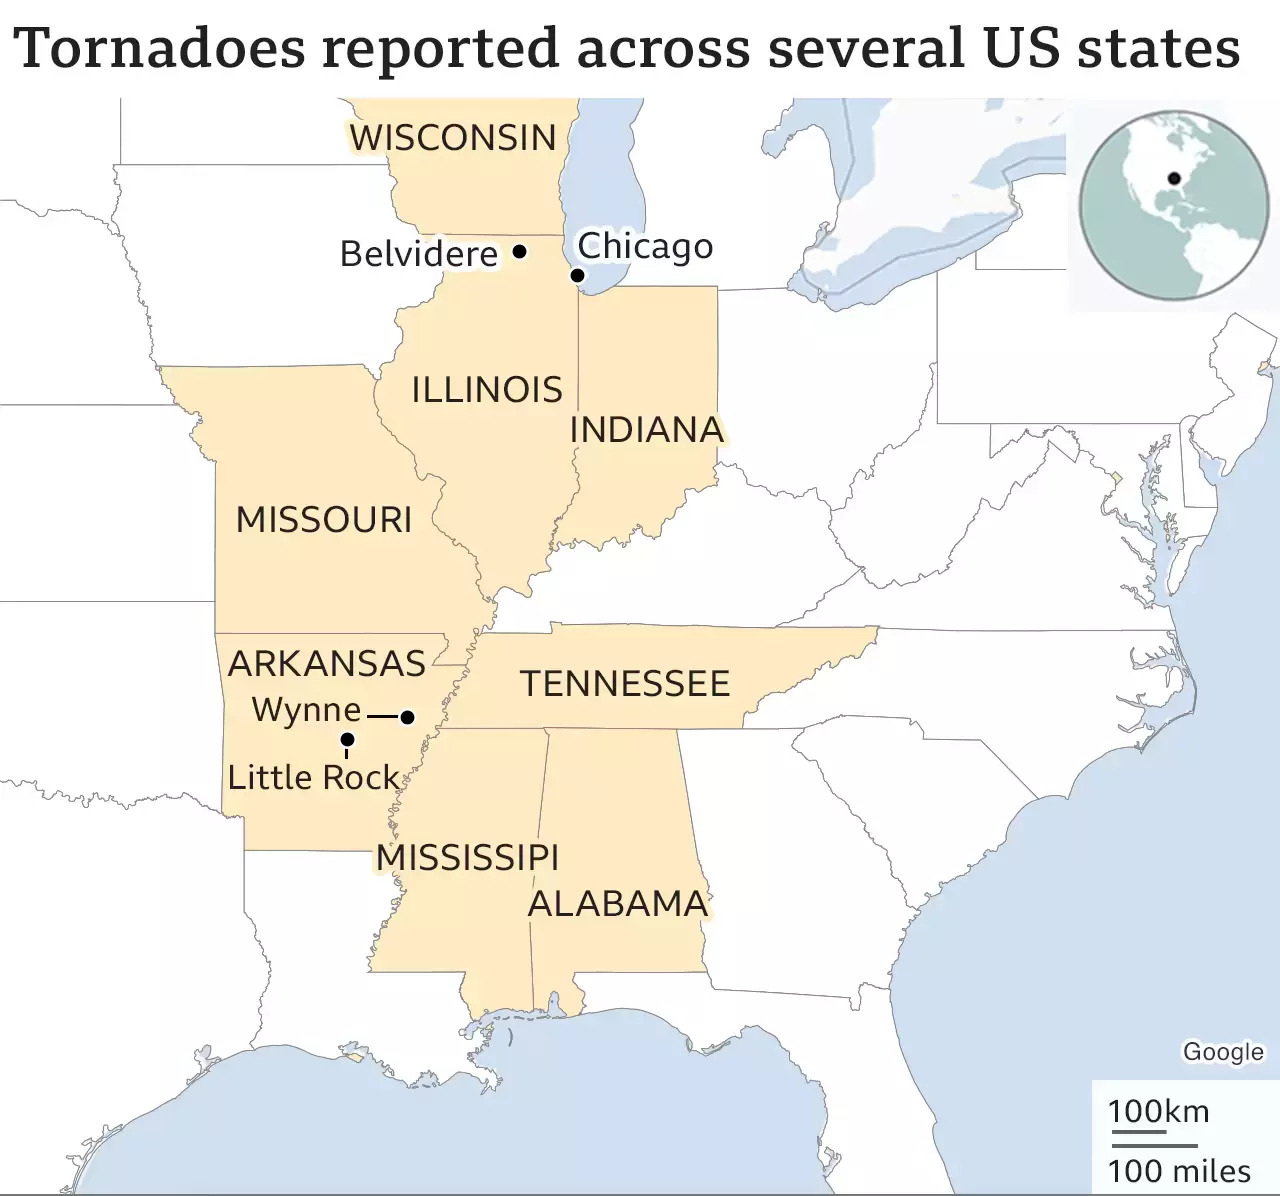 Tornadoes reported across several US states